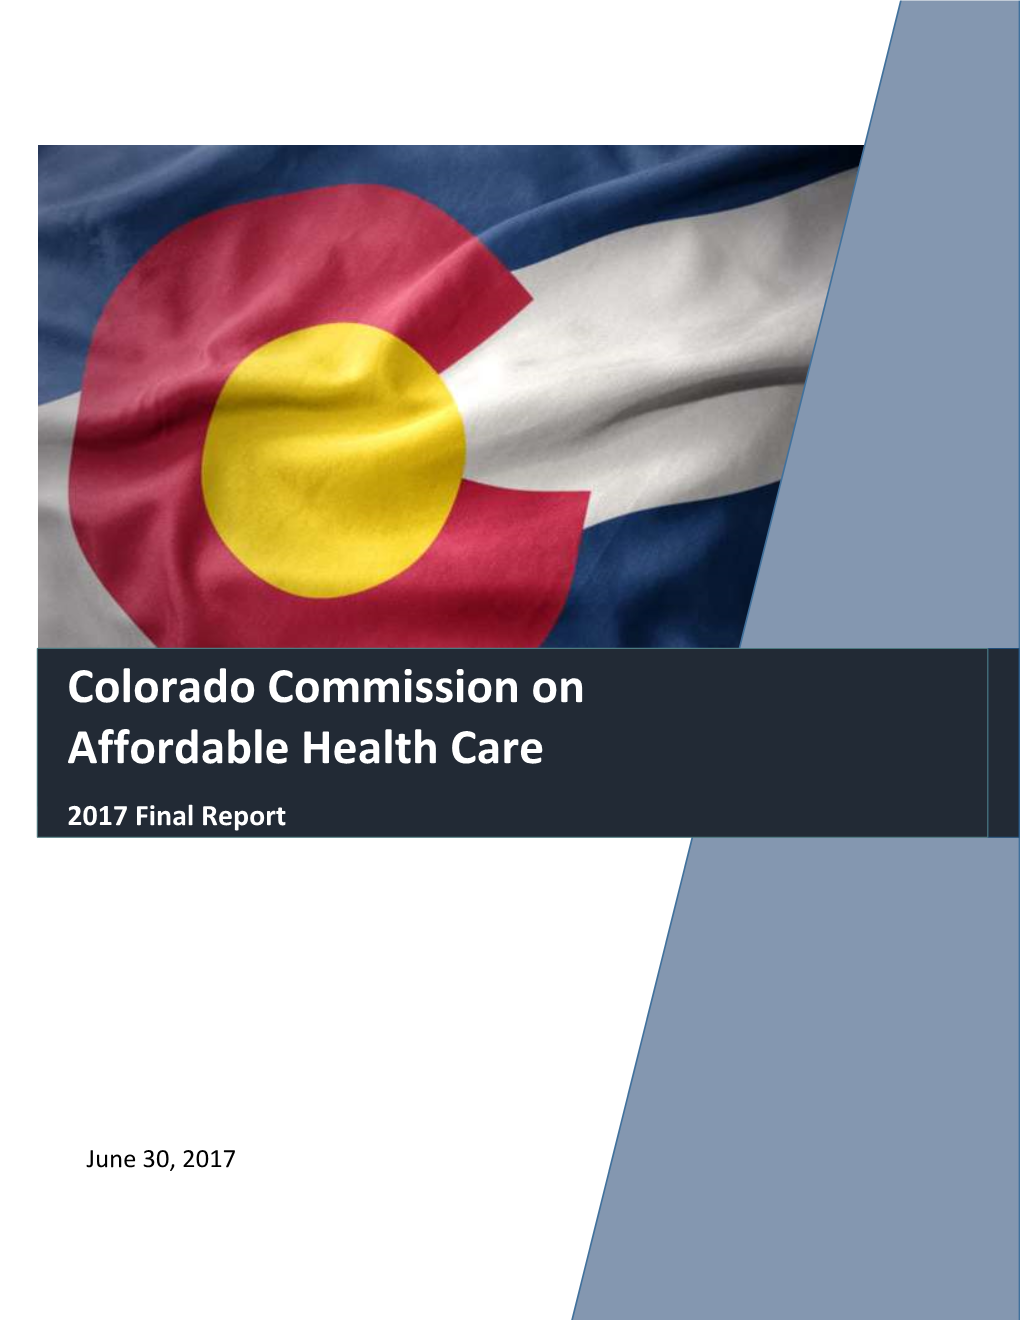 Colorado Commission on Affordable Health Care 2017 Report to The